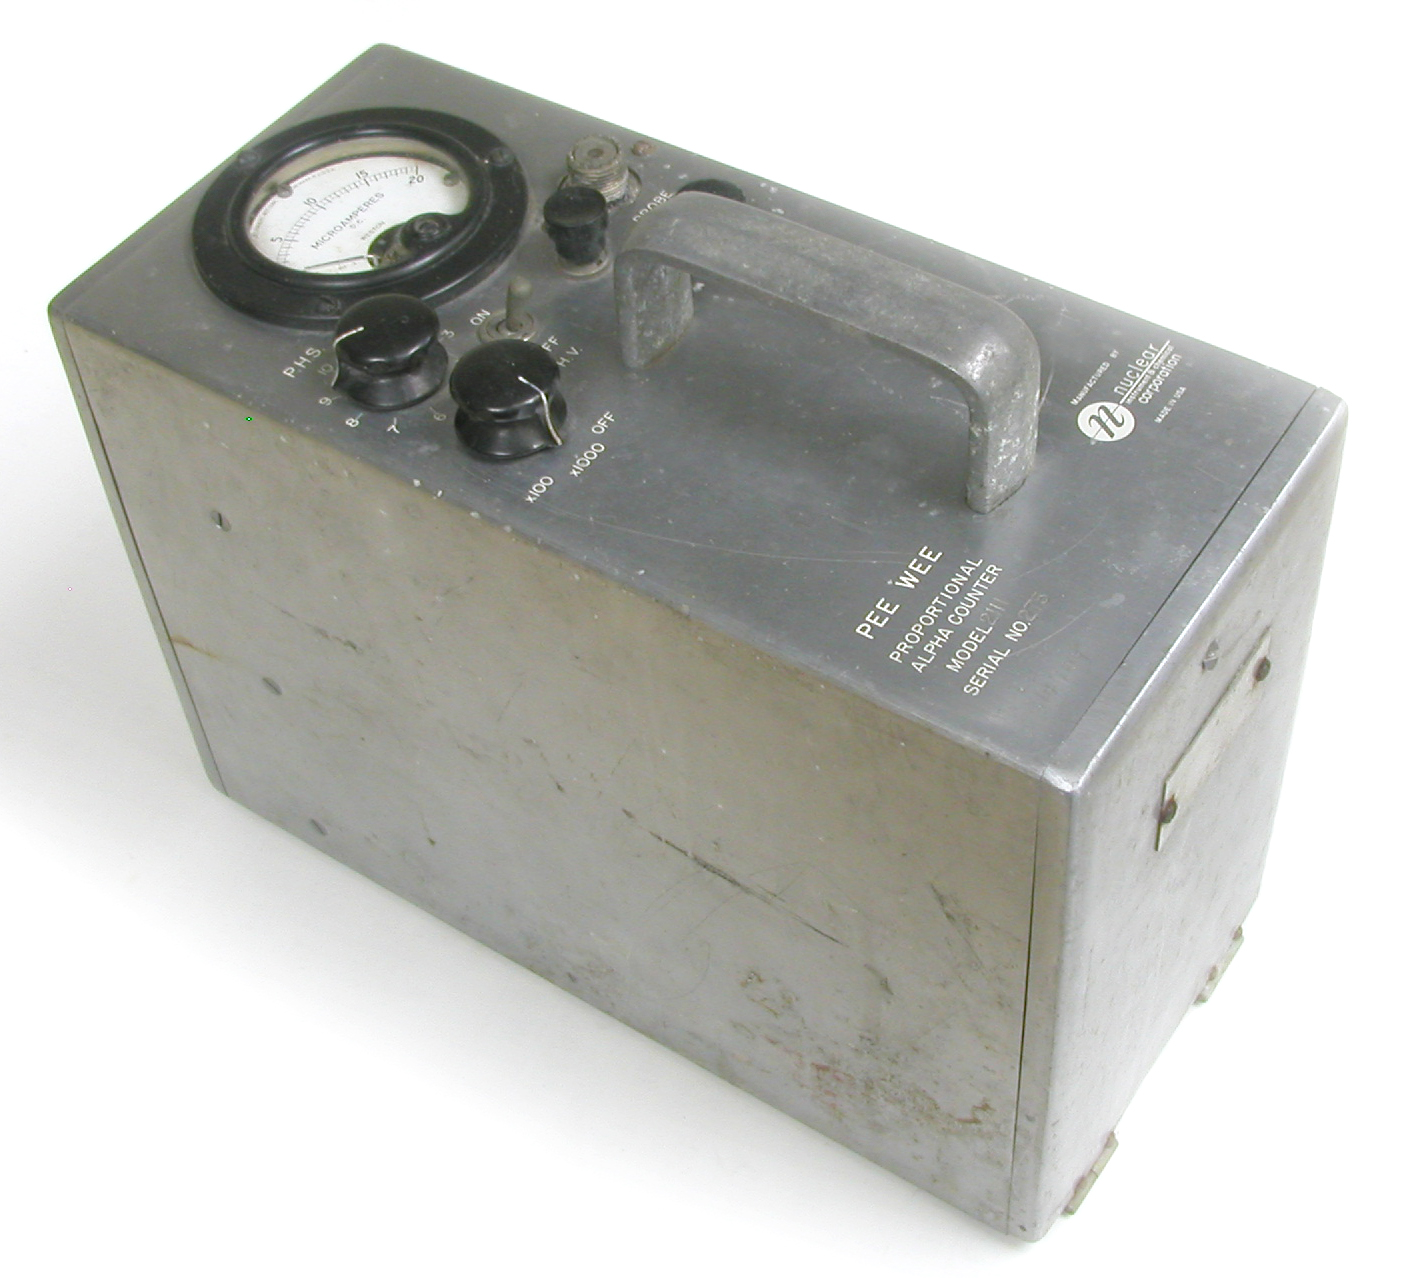 "Pee Wee" Model 2111 Alpha Counter (1949-1953)